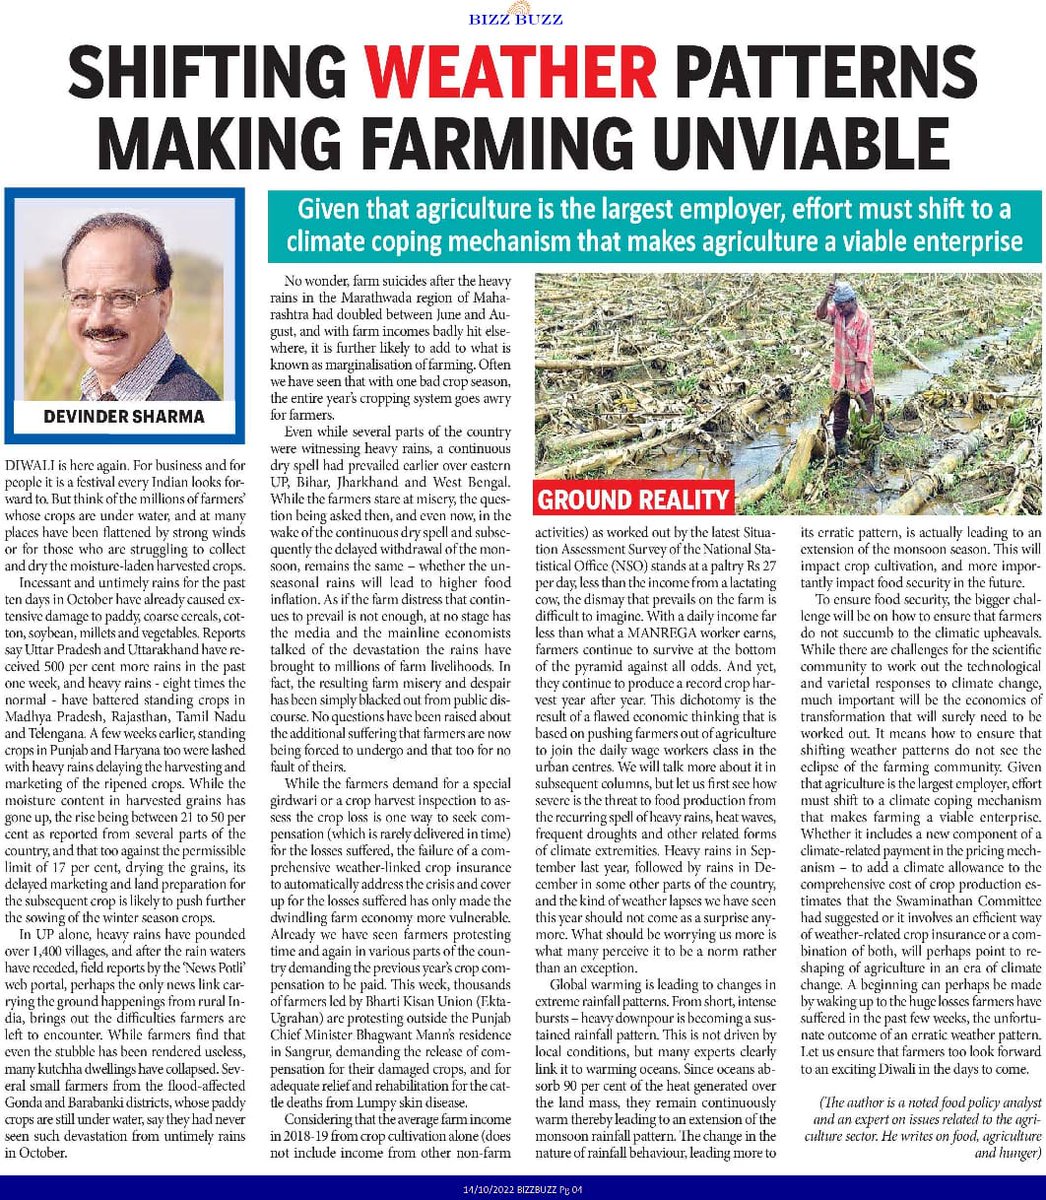 With heavy rains lashing standing and harvested crops in the first 12 days of October, adding on to farm misery, will farmers be looking forward to a bright Diwali this year?My article today. #BizzBuzz. #ClimateEmergency #Farmers